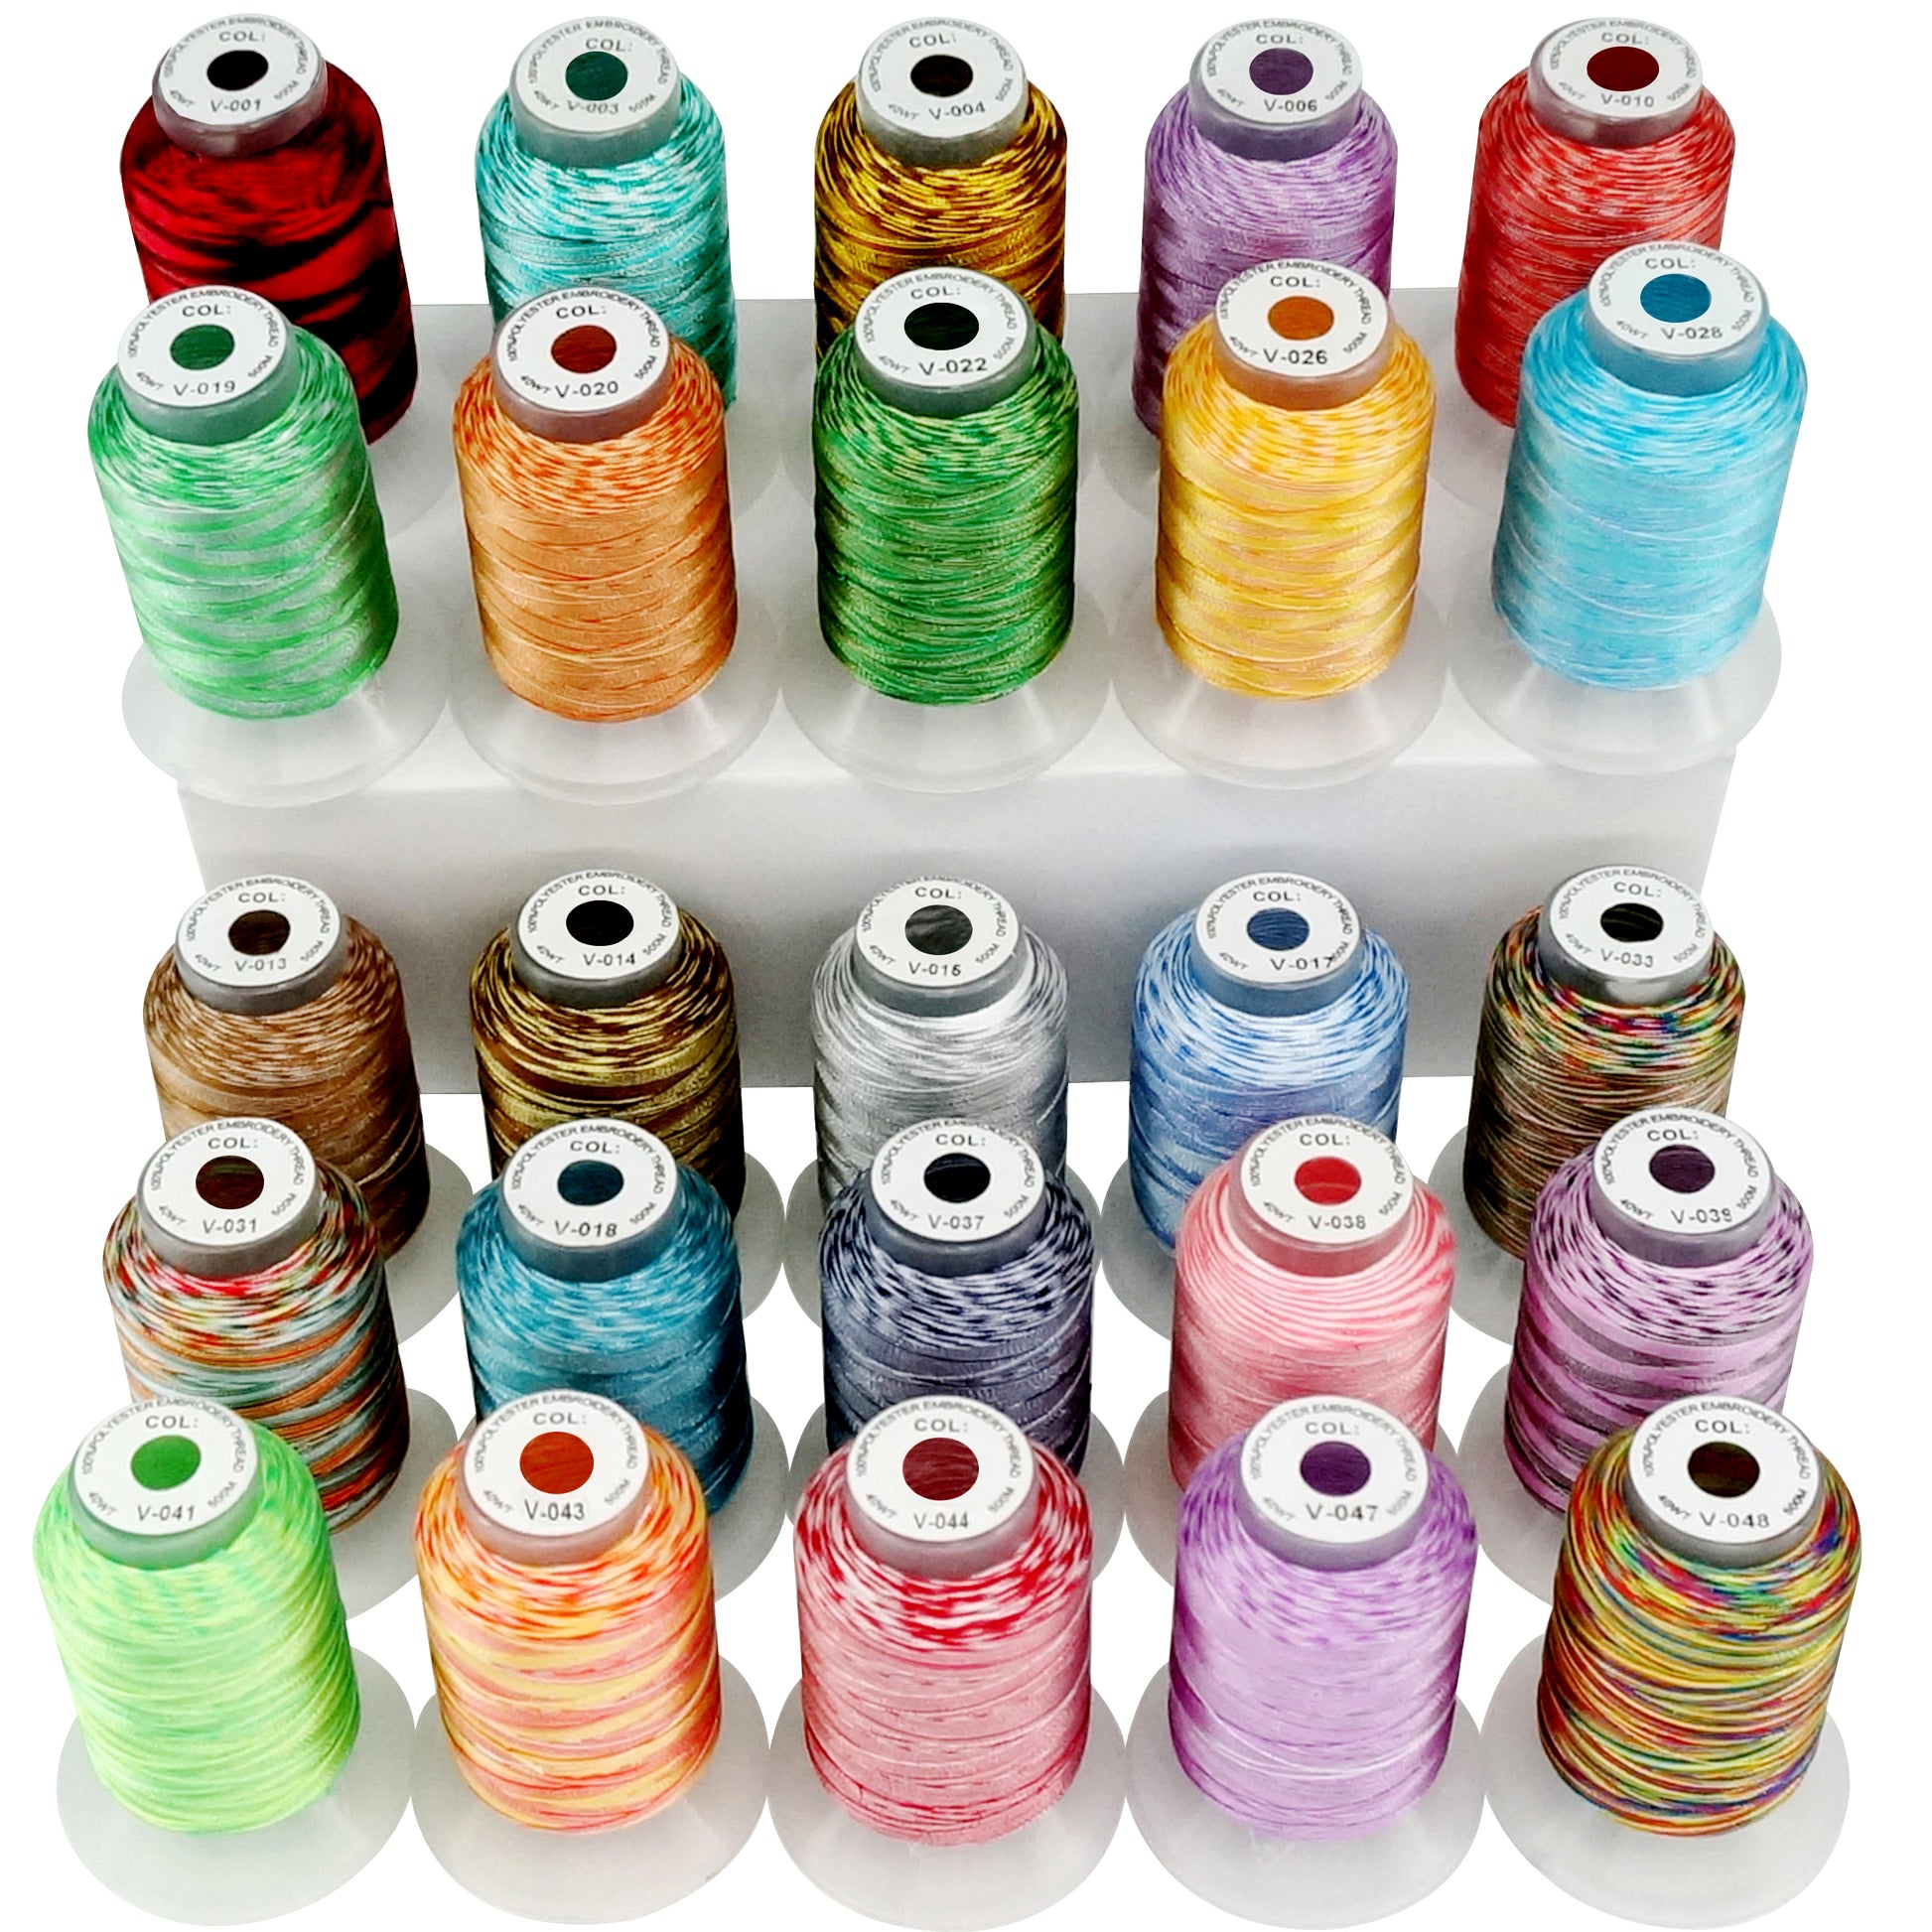 New brothread 80 Spools 500m Each Embroidery Machine Thread with Clear  Plastic Storage Box - Colors Compatible with Janome and Robison-Anton Colors